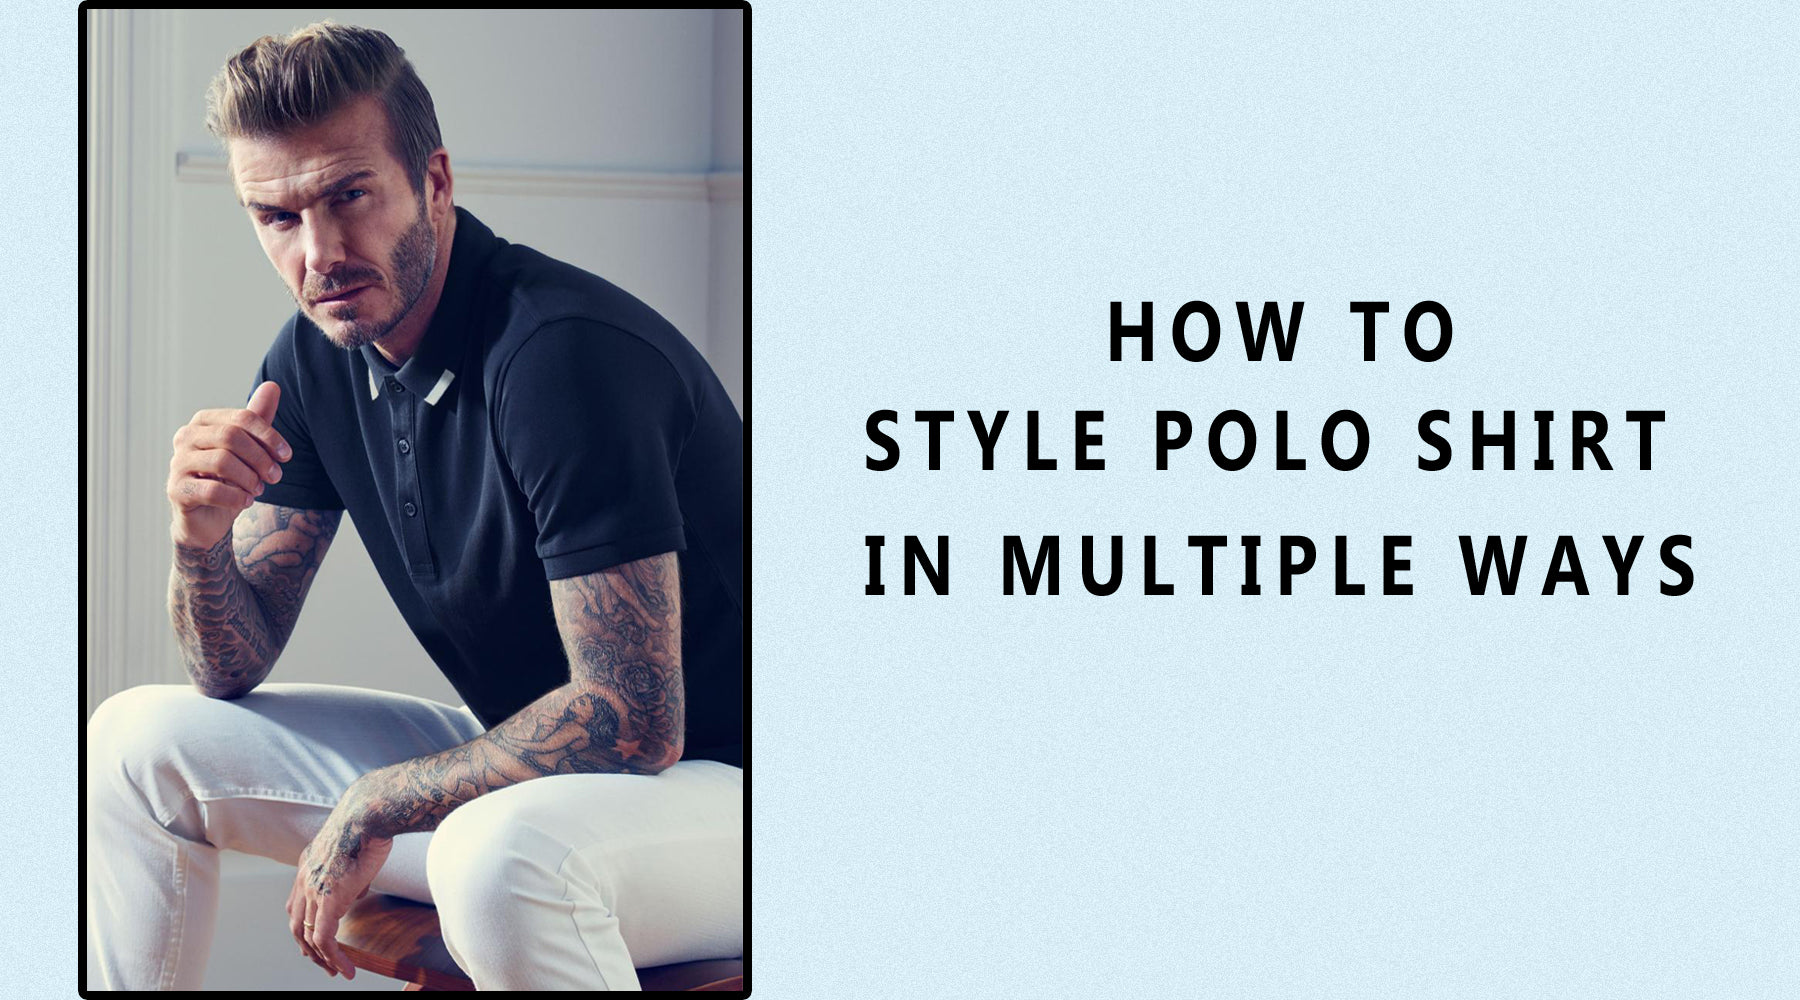 HOW TO STYLE POLO SHIRT IN MULTIPLE WAYS– JUMP USA